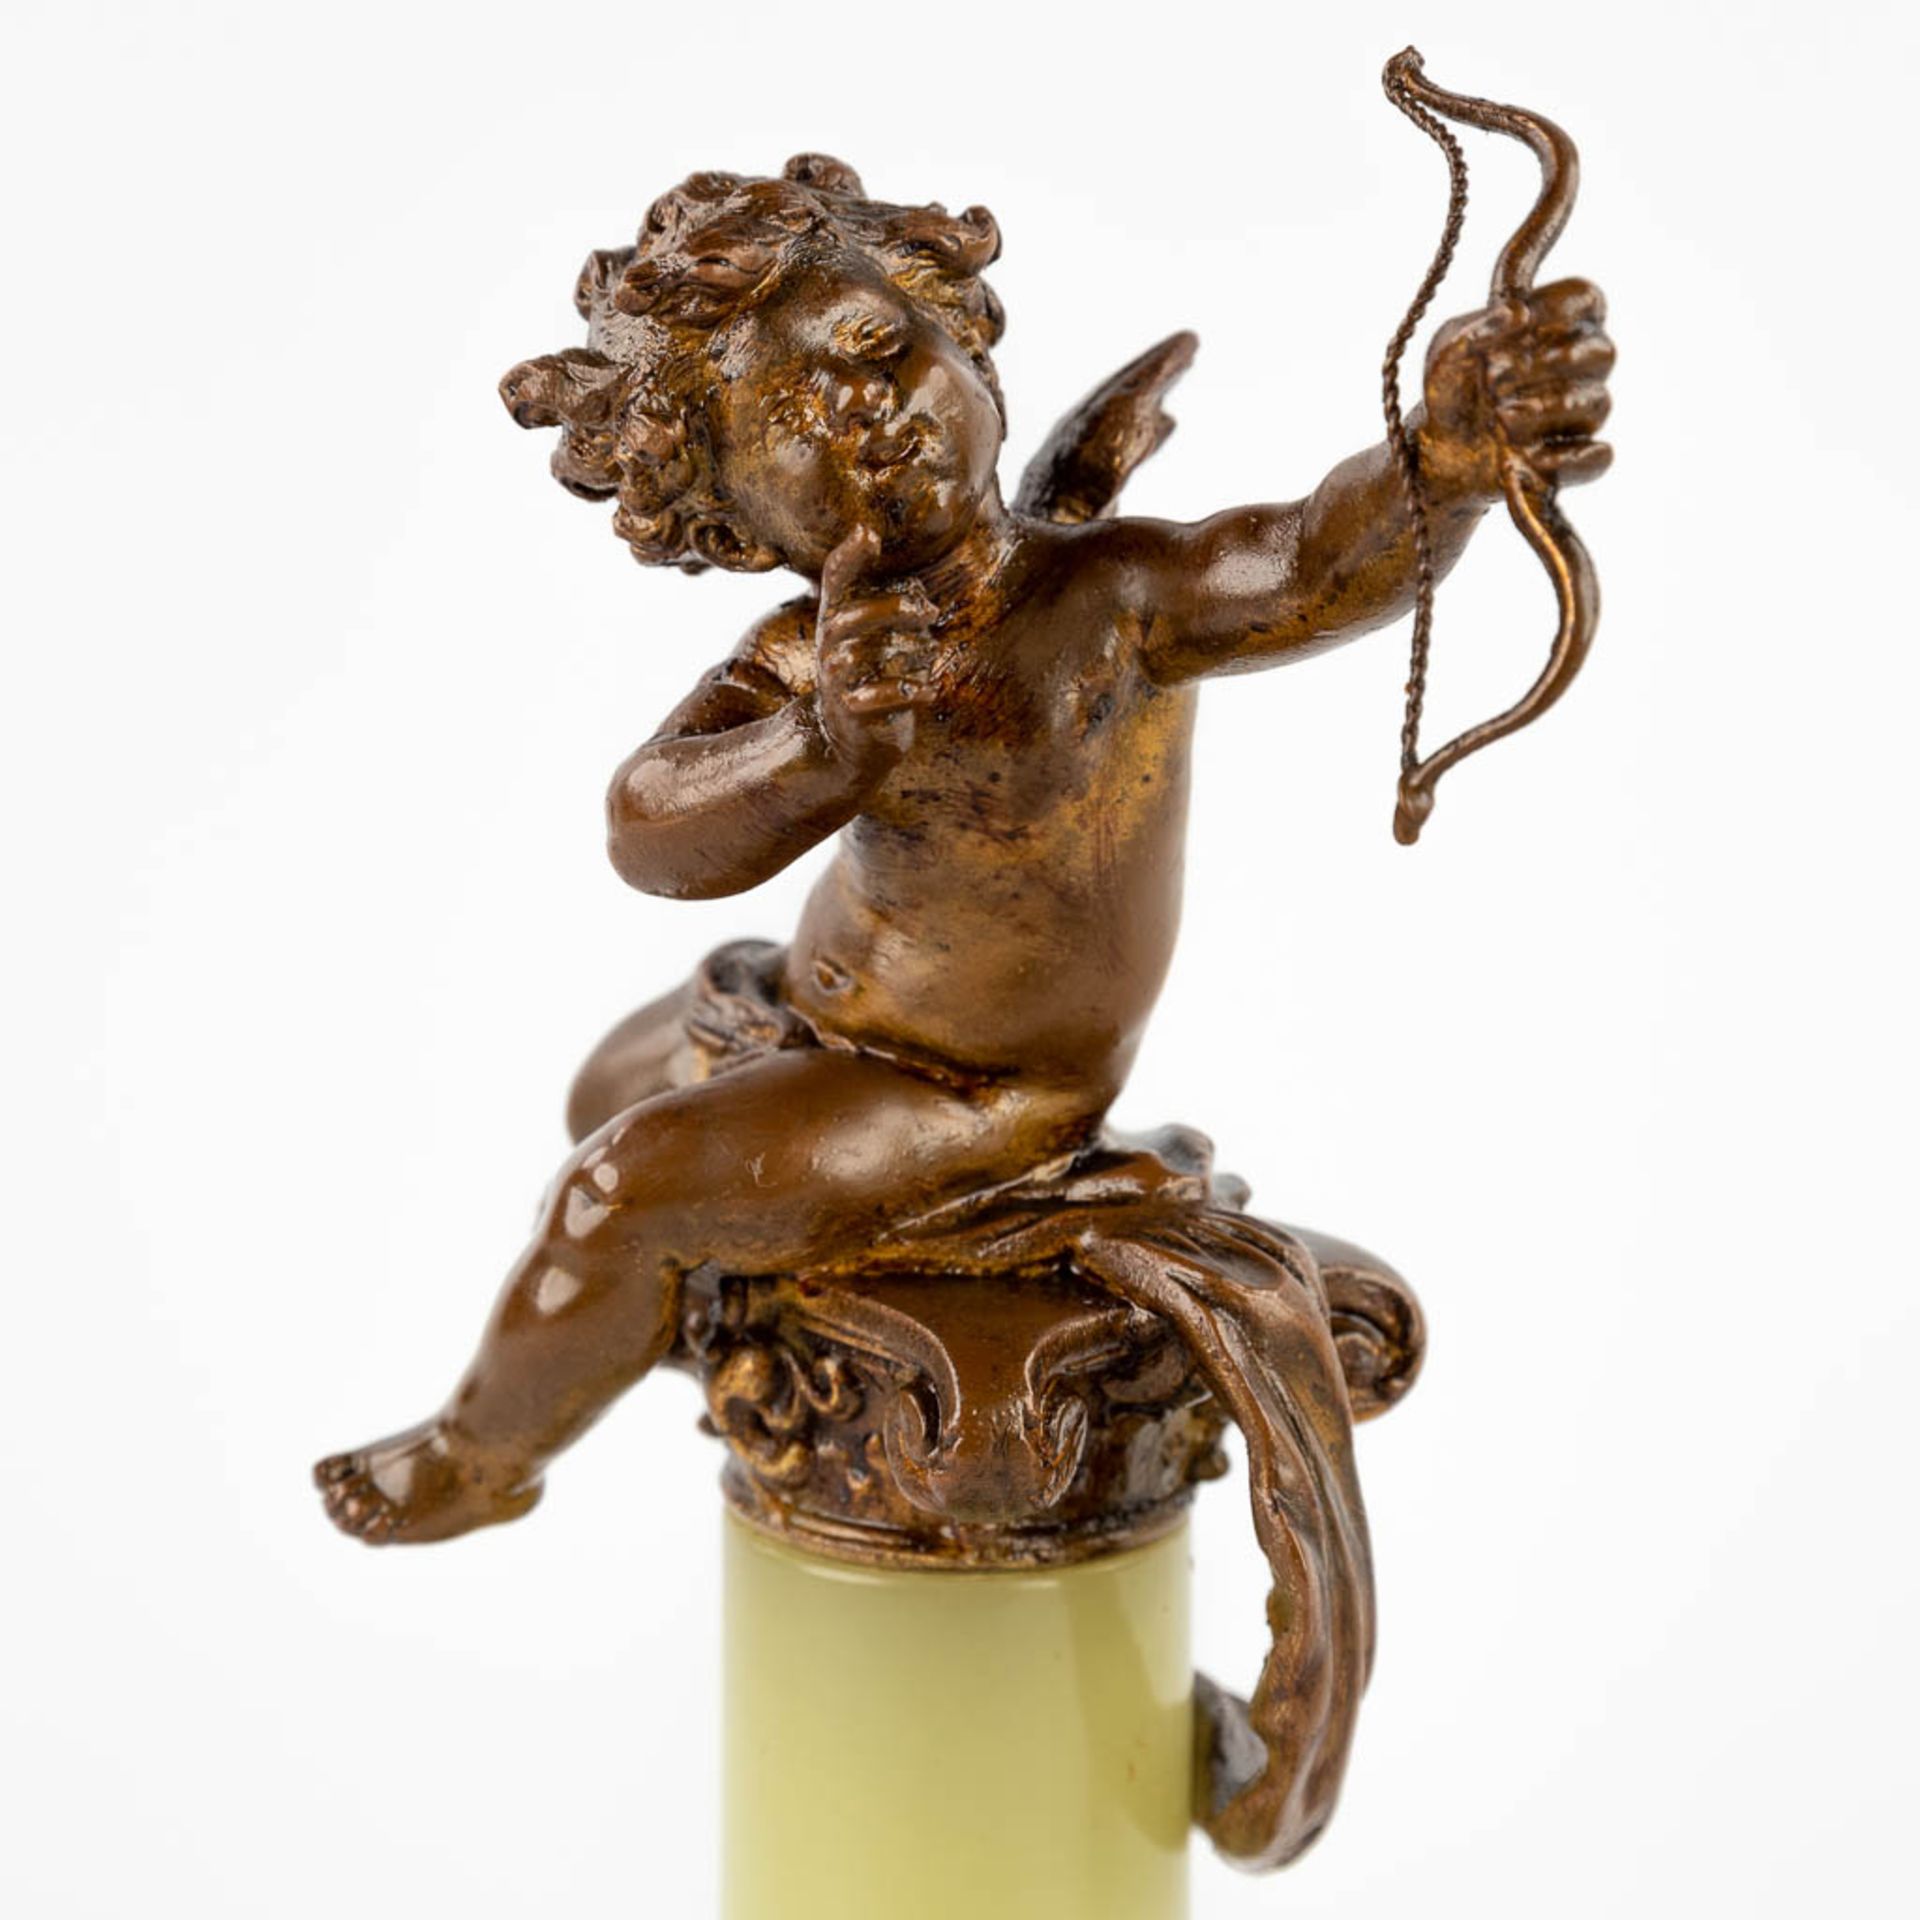 A pair of putti on a pedestal, spelter and onyx in Louis XV style. 19th C. (D:8 x W:8 x H:23 cm) - Image 10 of 11